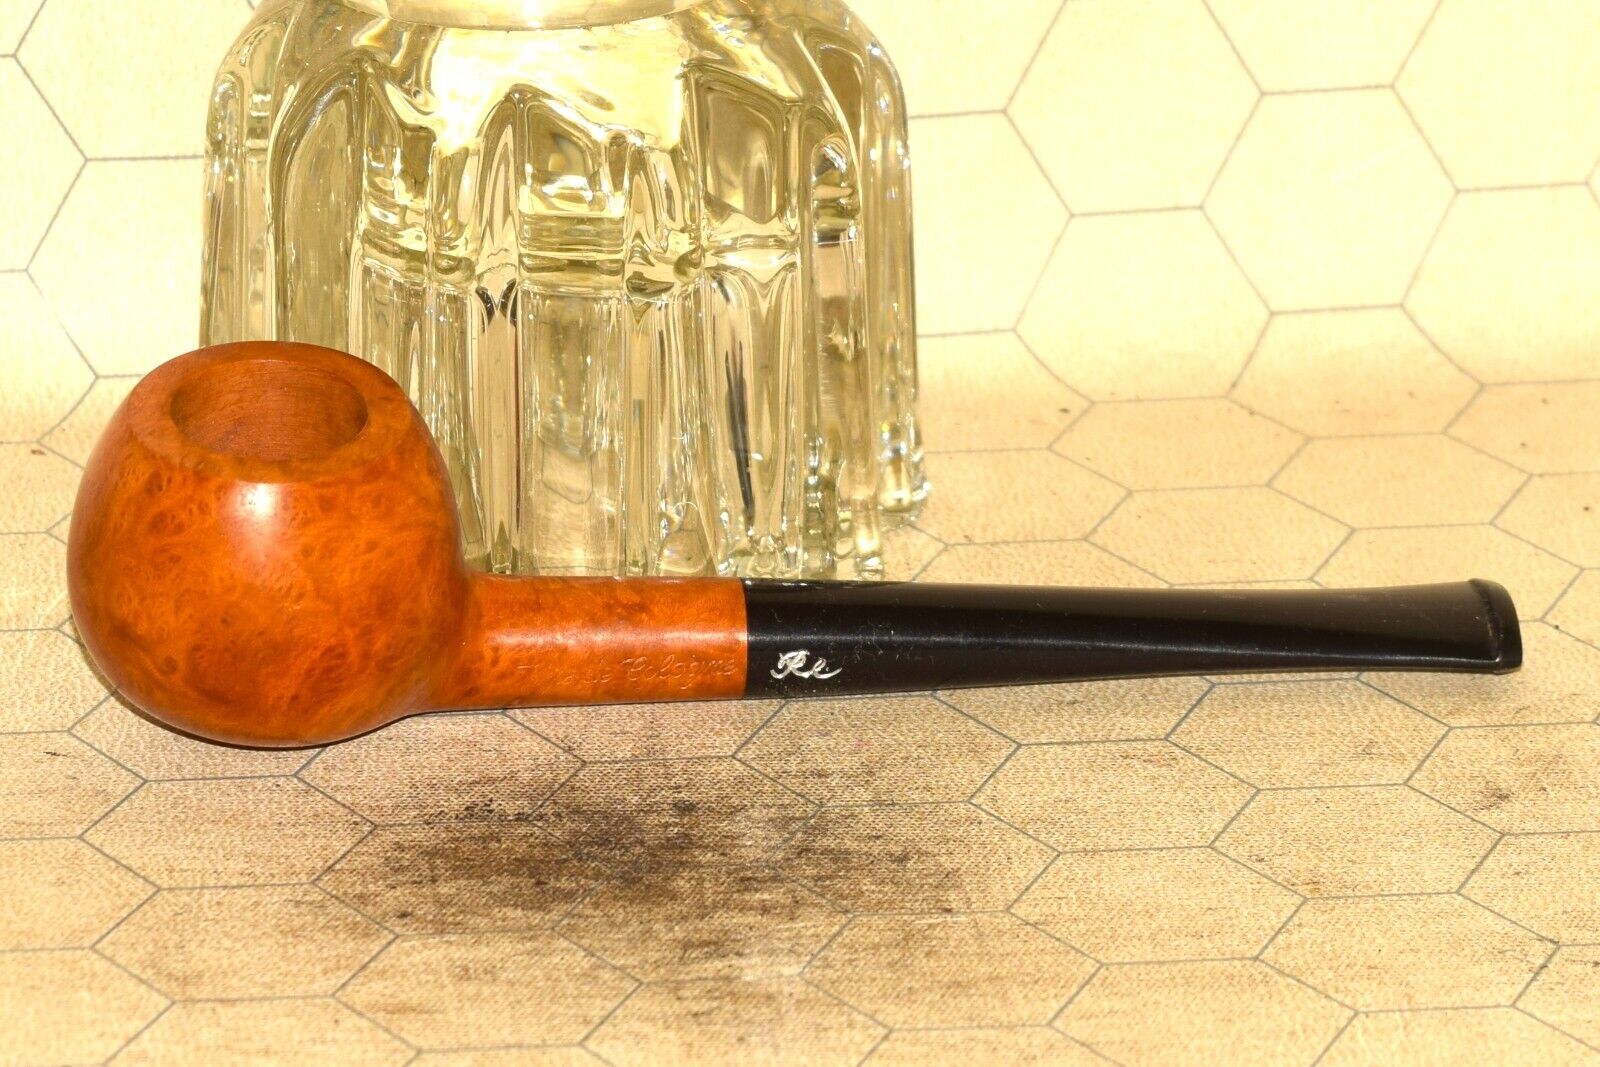 Unsmoked Small Shag PIPE D COLOGNE 6 BRUYERE STCLAUDE Sitter Tobacco Pipe  #A691